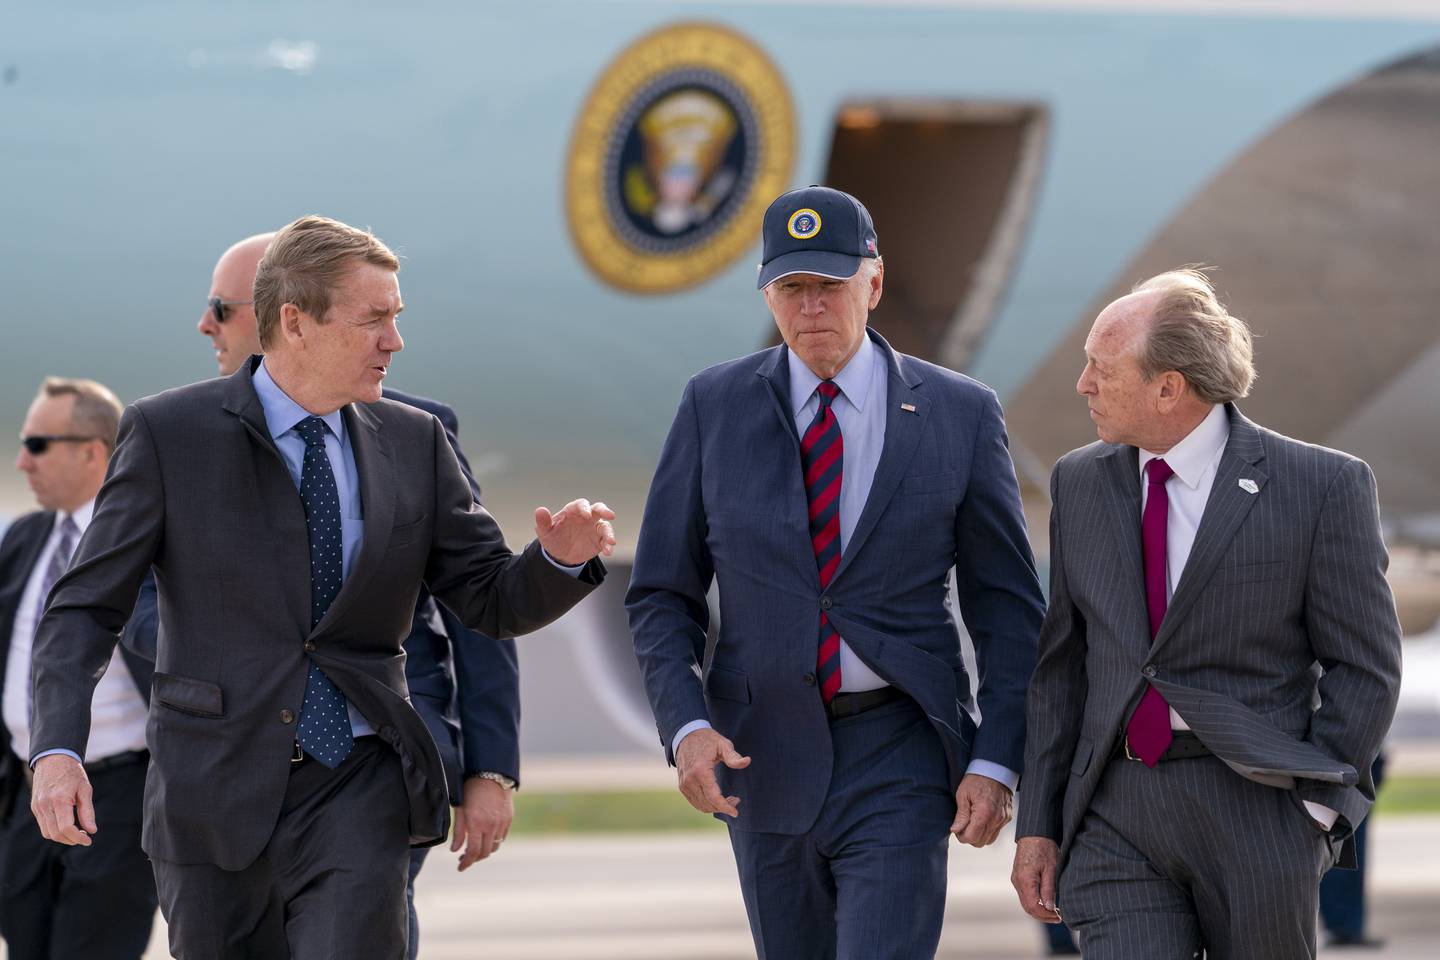 Air Force One is visible as President Joe Biden, center, speaks with by Sen. Michael Bennet, D-Colo., left, and Colorado Springs Mayor John Suthers, right, as he arrives at Peterson Space Force Base in Colorado Springs, Colo., Wednesday, May 31, 2023.